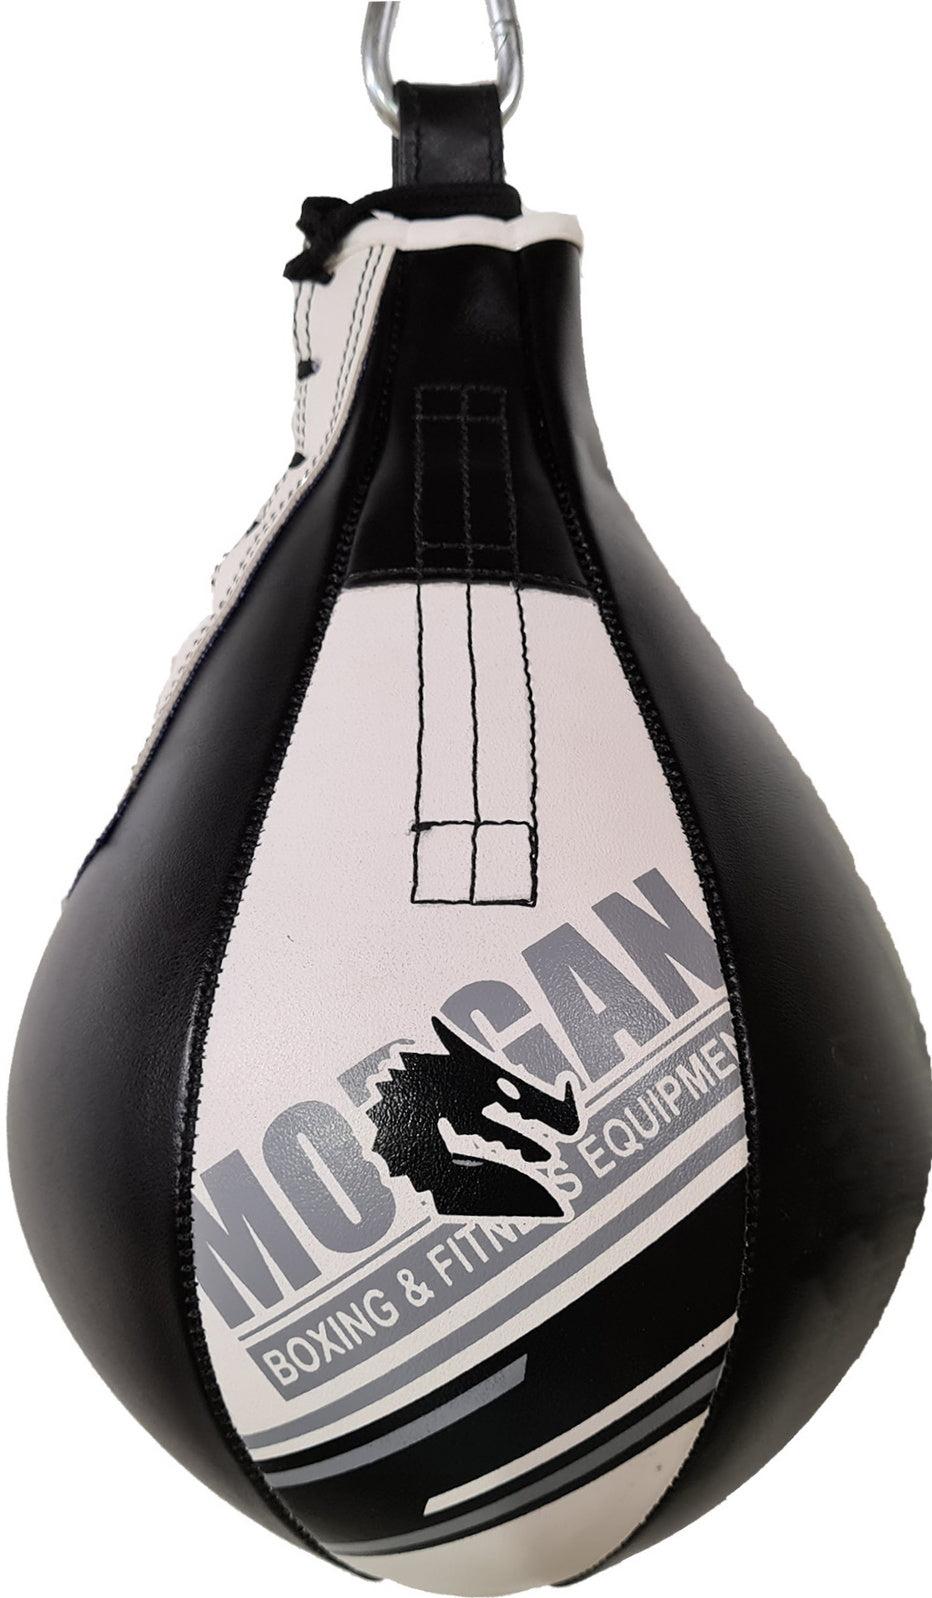 Aventus Speed ball, black and white, boxing mma punch ball bag